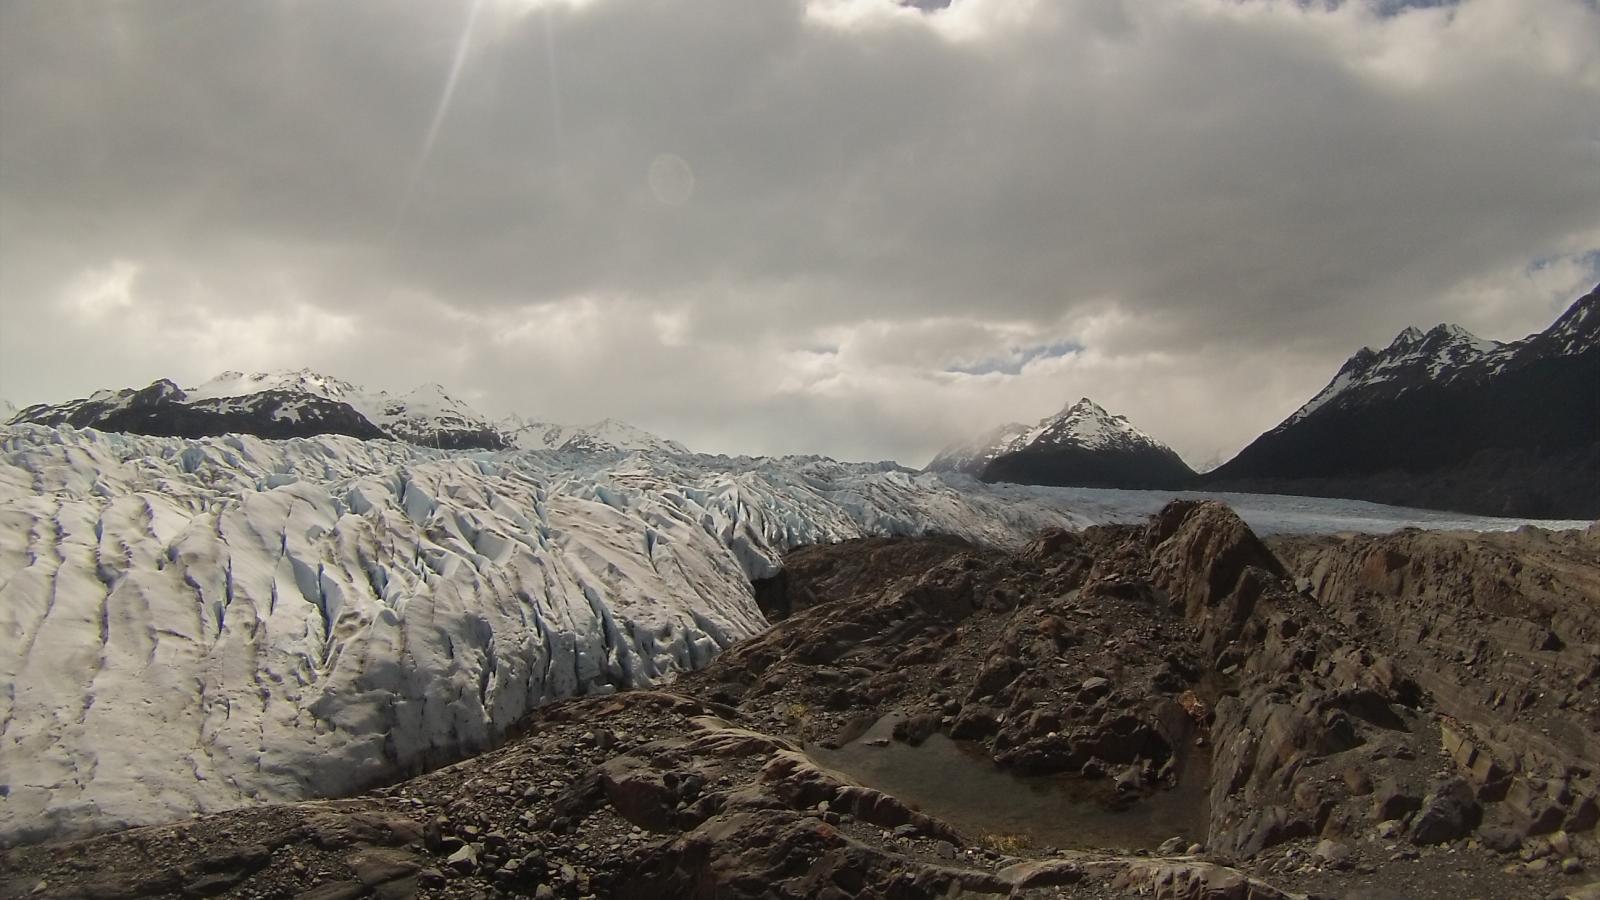 Grey Glacier in Torres Del Paine National Park in Southern Chile